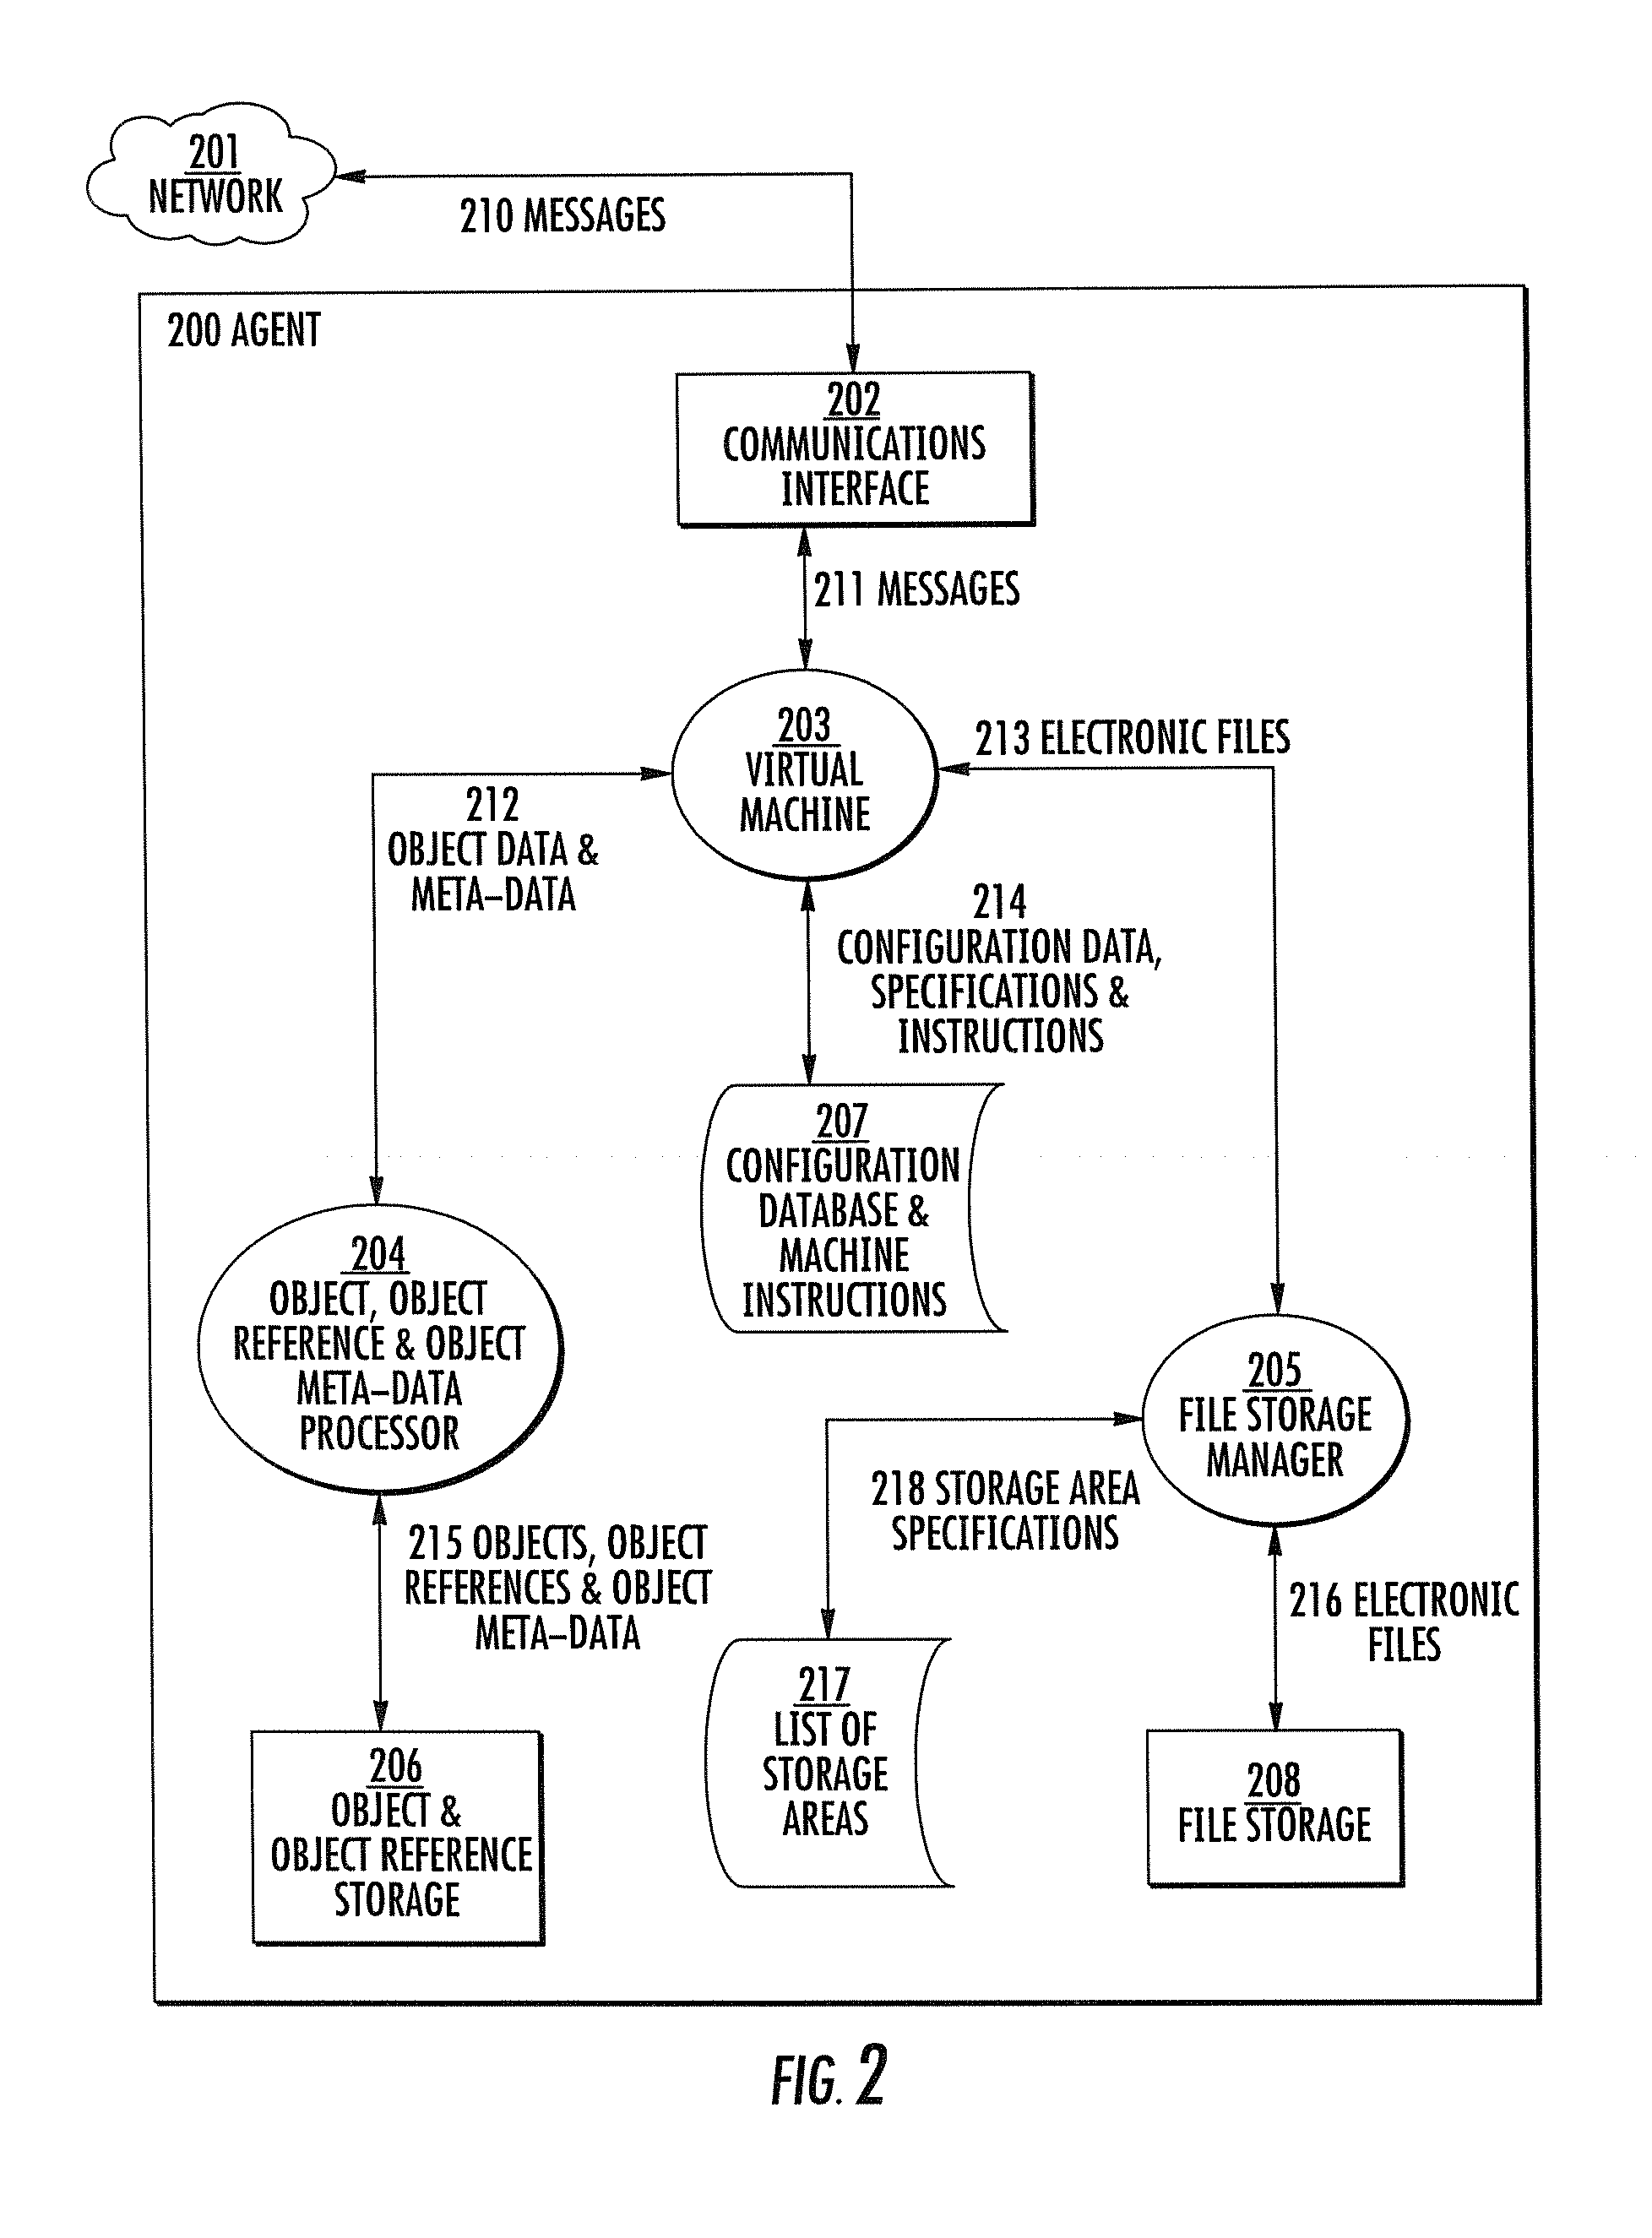 Storing and retrieving objects on a computer network in a distributed database